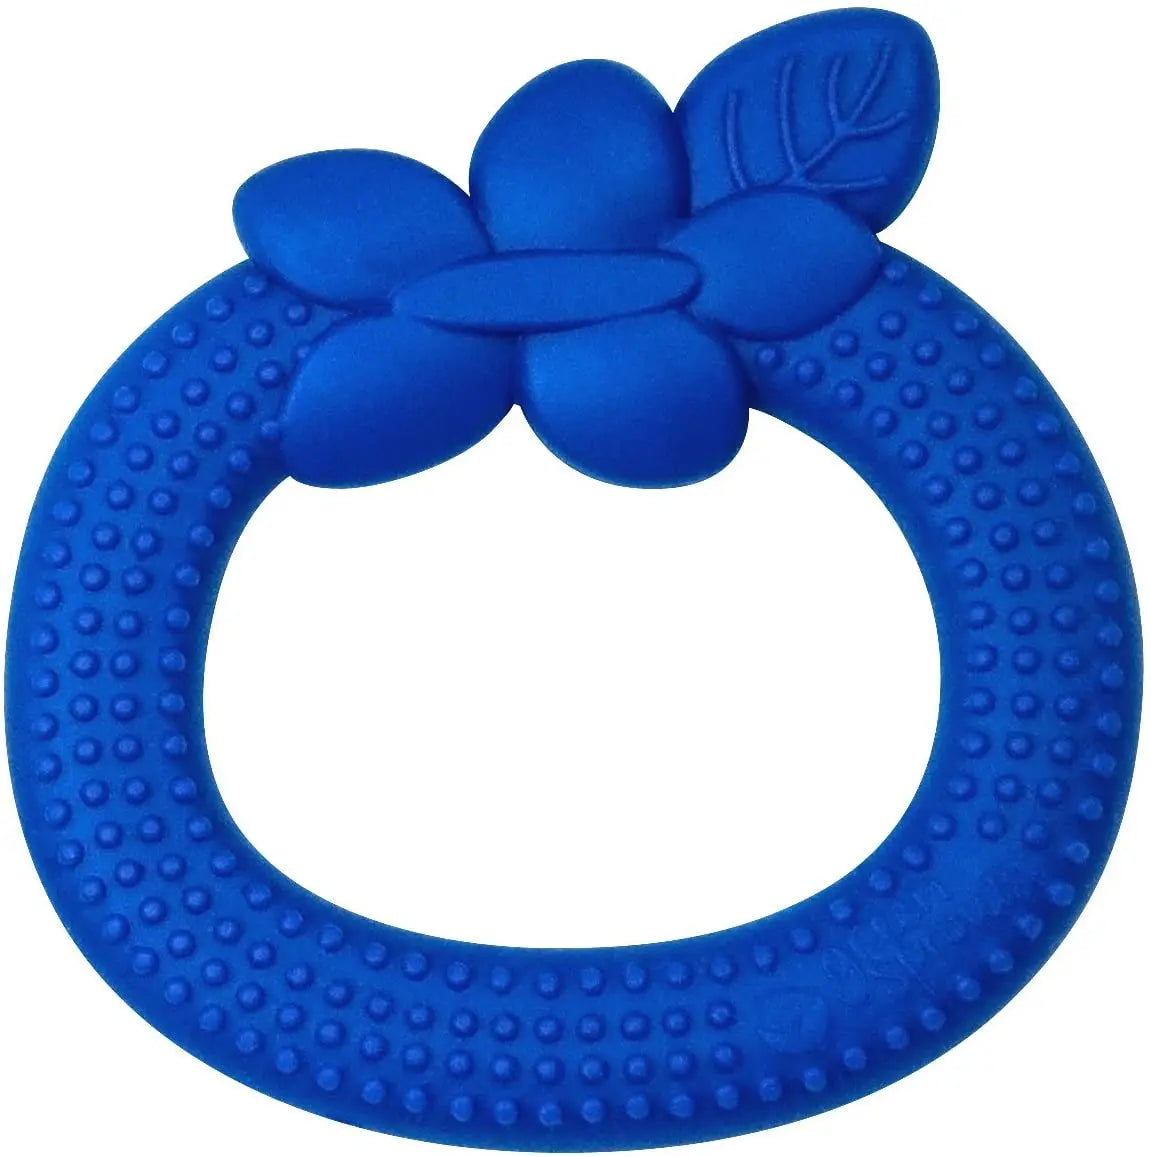 Silicone Fruit Teether-Blueberry